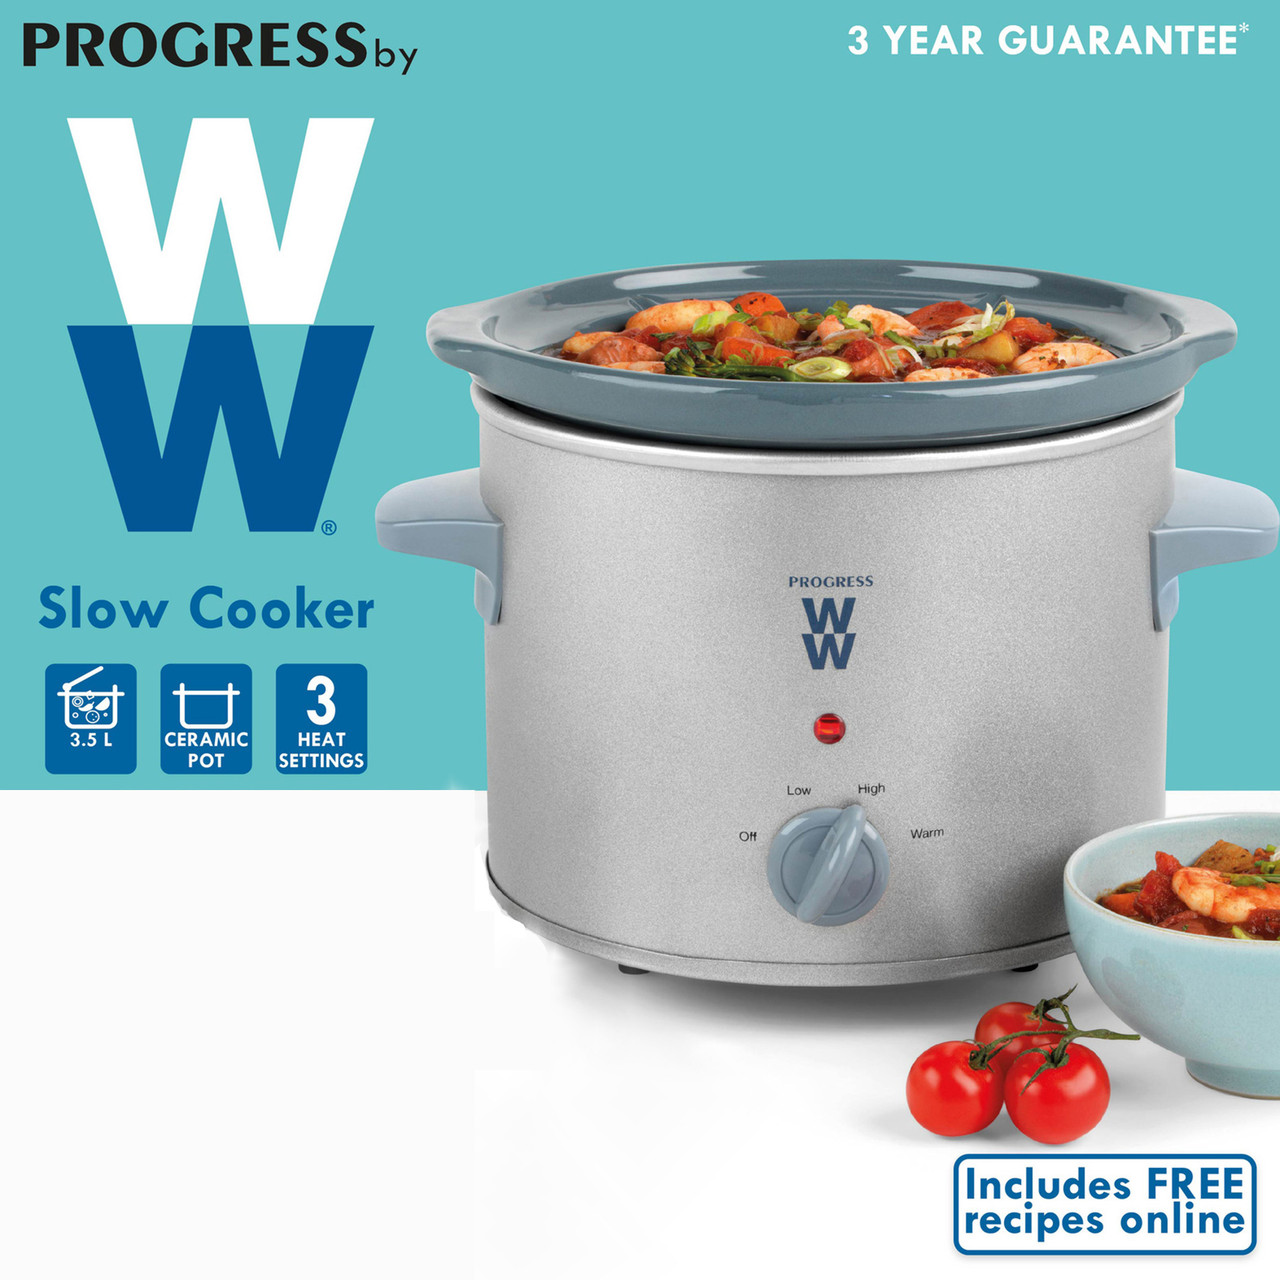 WW 3.5 L Slow Cooker with 3 Heat Settings, Power Lights